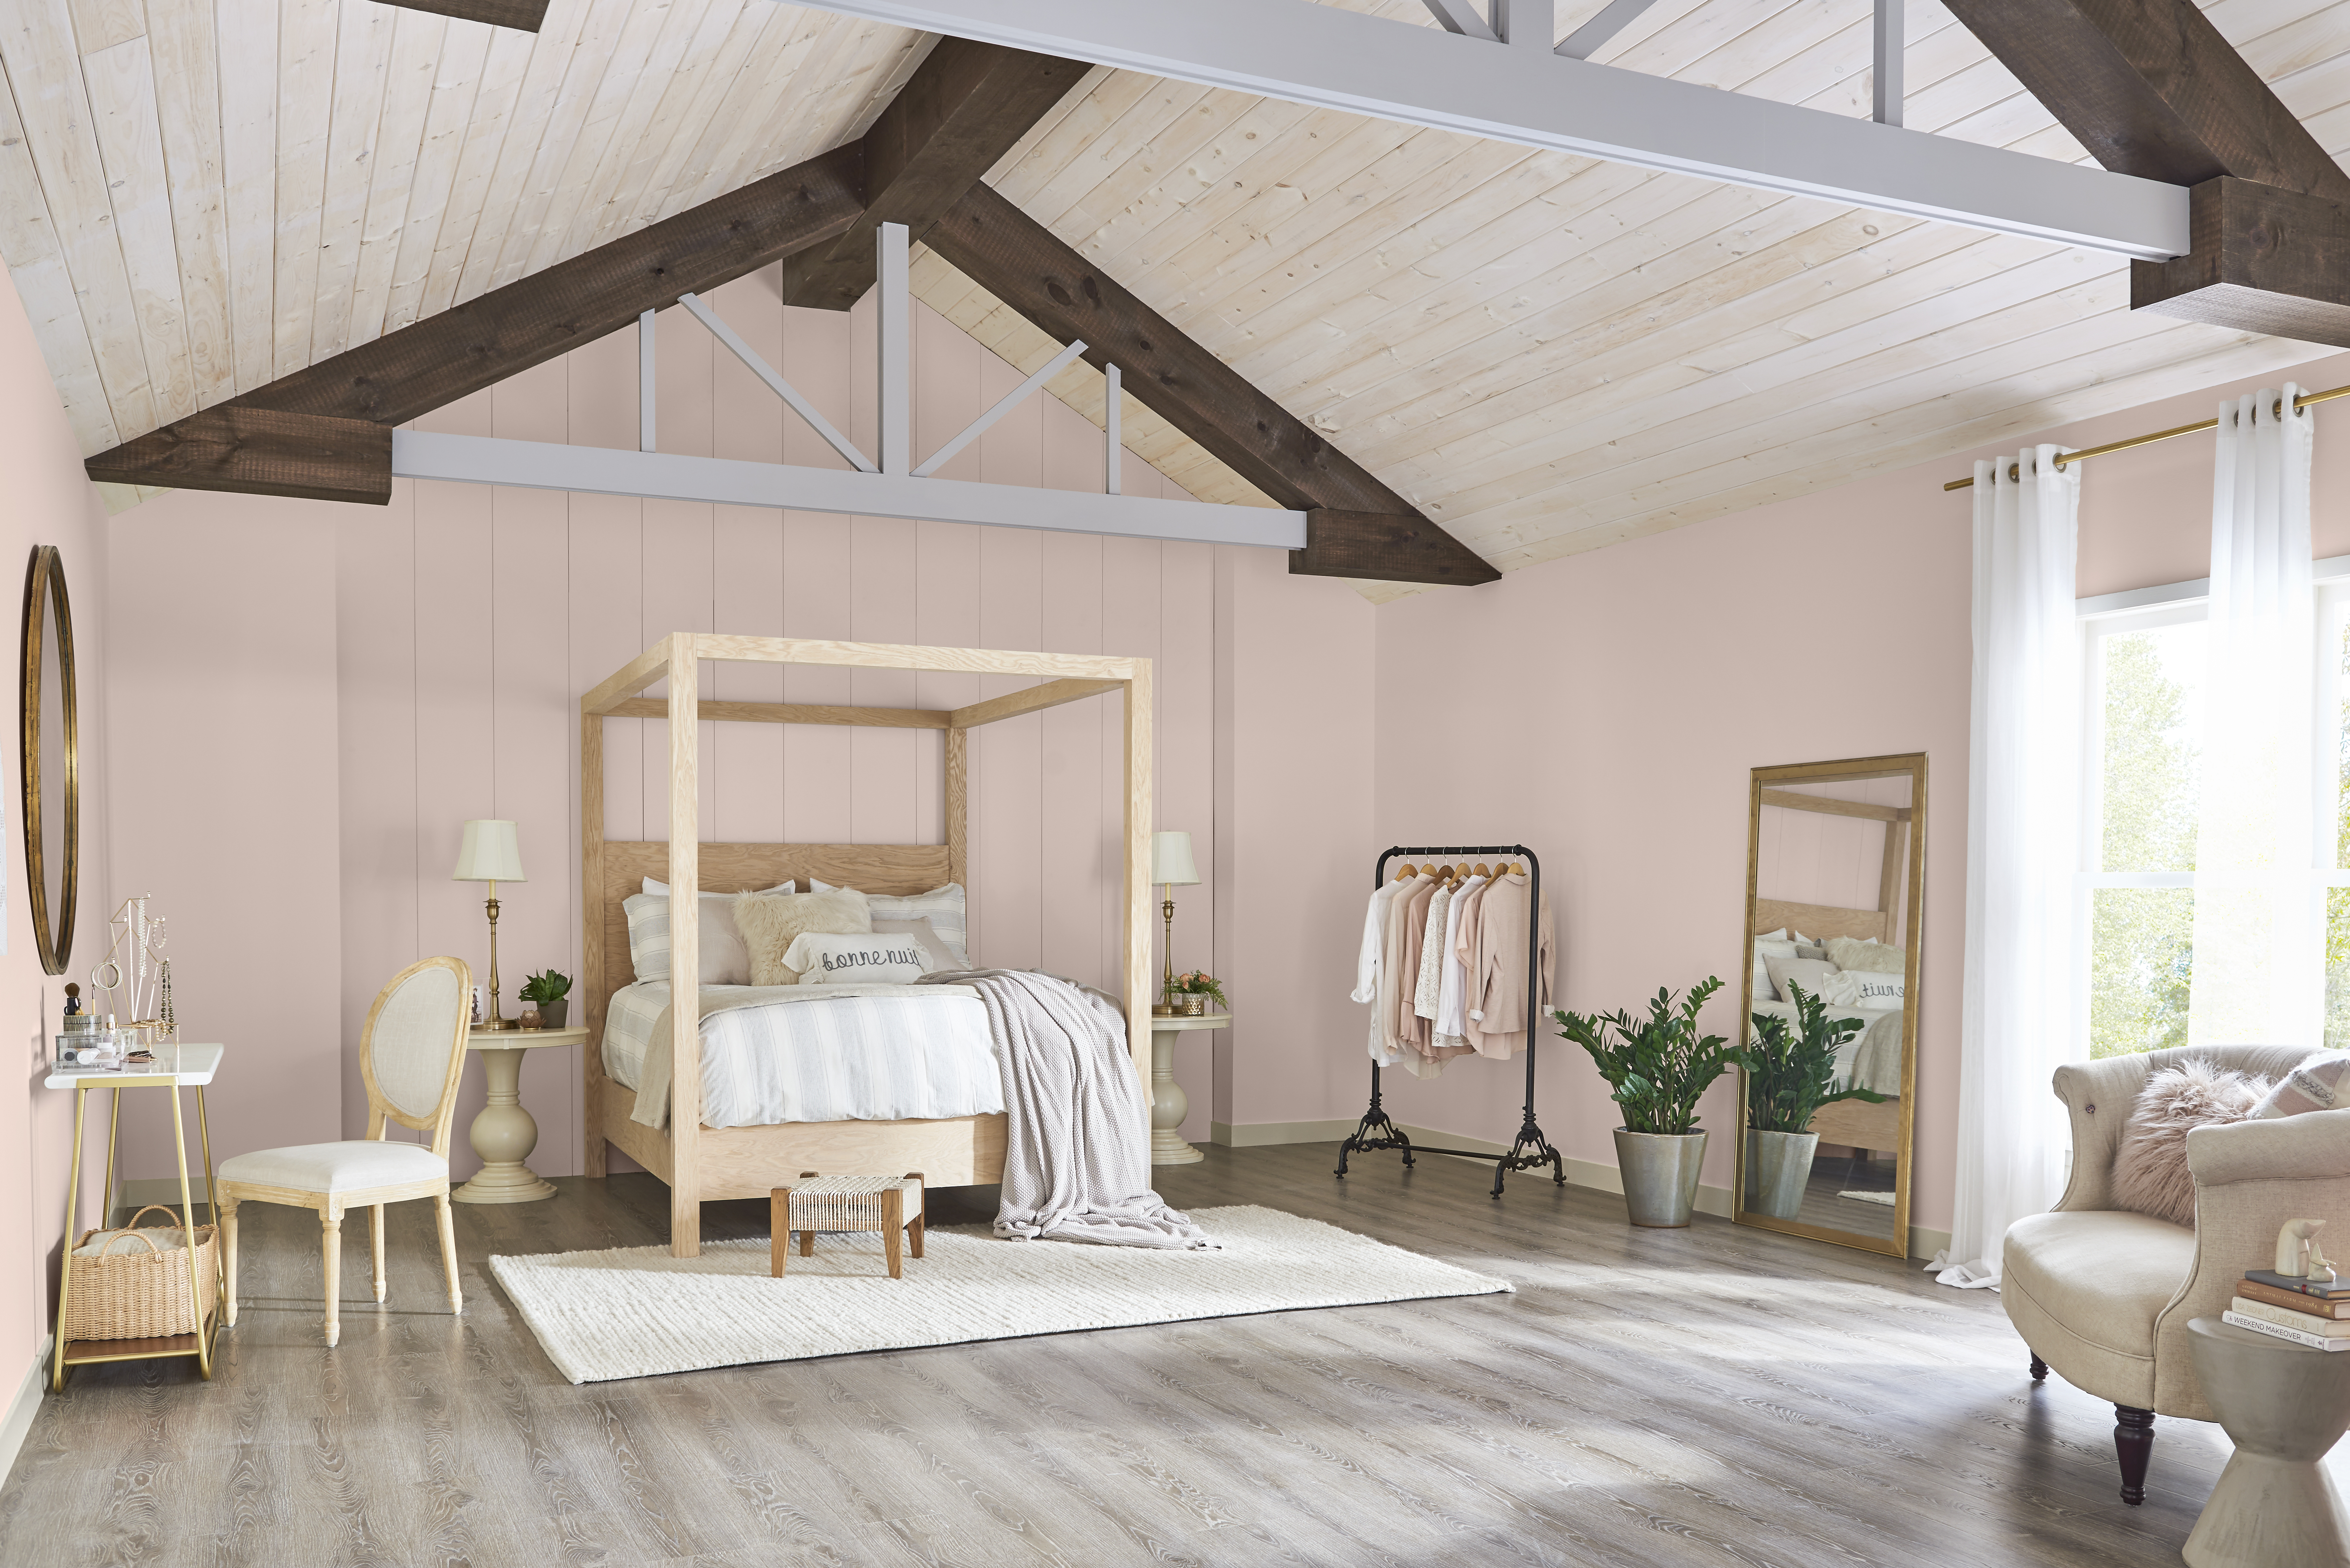 A bedroom with walls painted in Smokey Pink and a large wooden canopy bed styled with neutral pillows and bedding